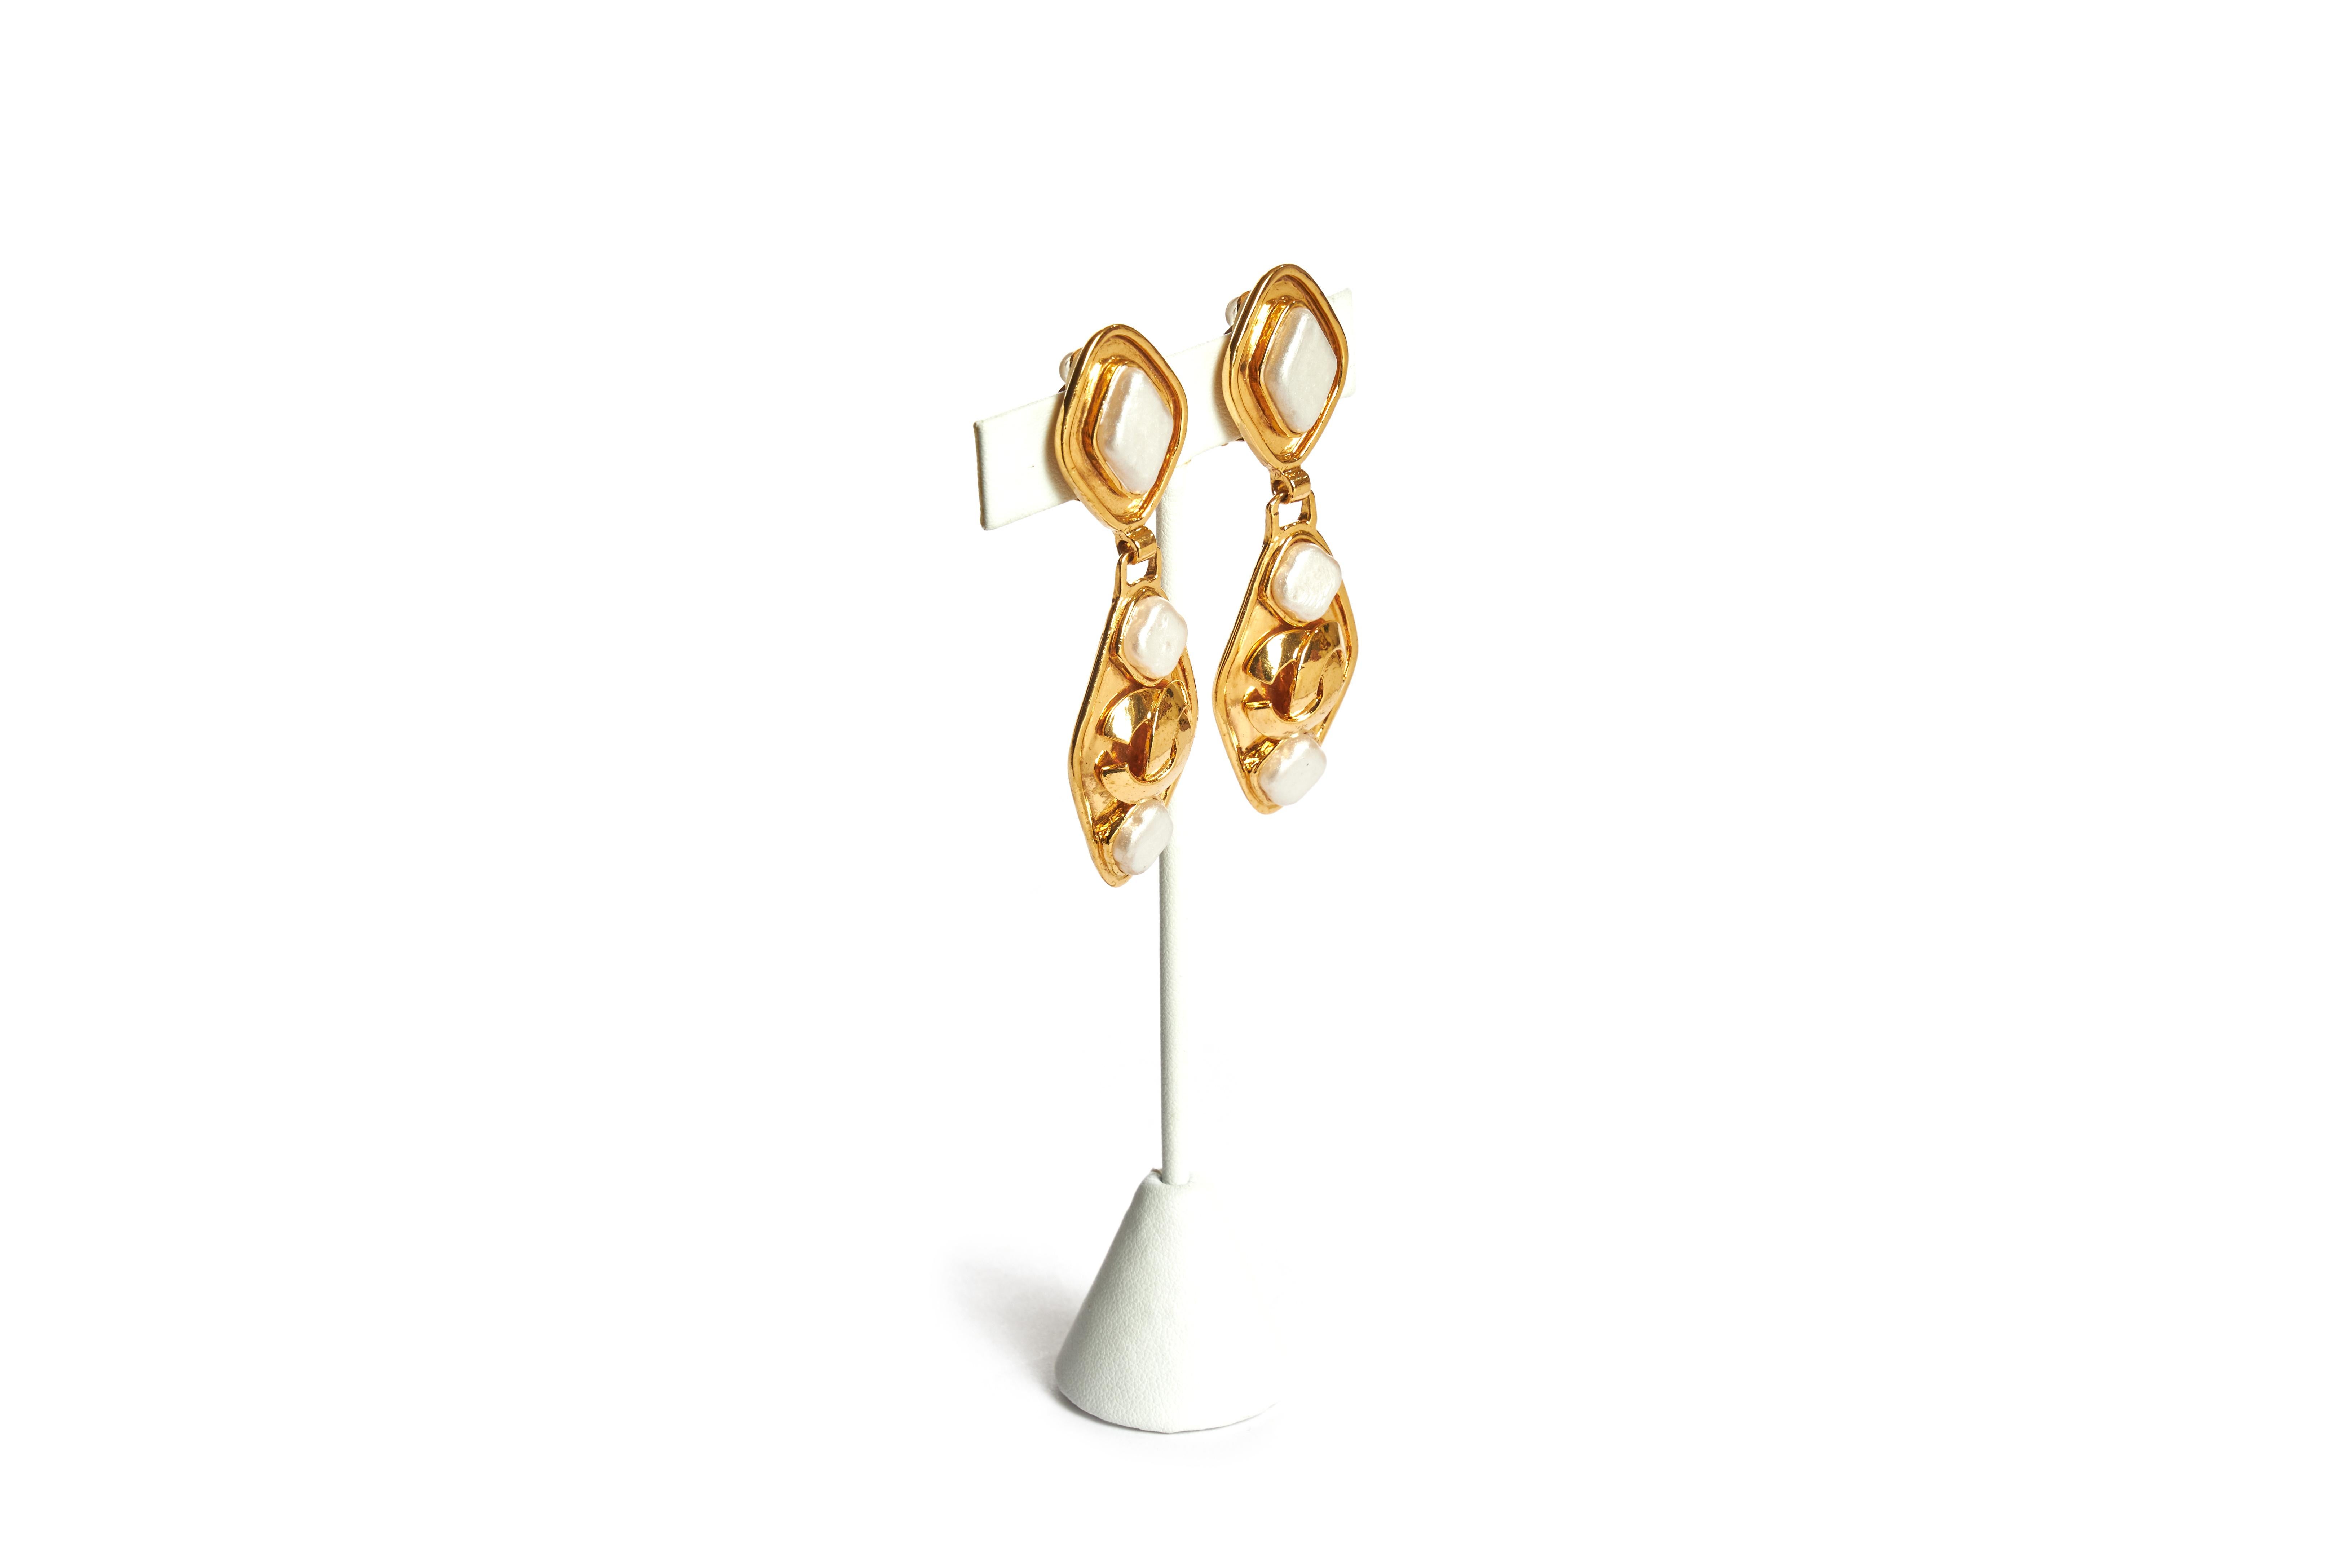 Chanel long diamond shape dangle earrings with faux pearls. Collection spring 95. Come with original dust cover or box.